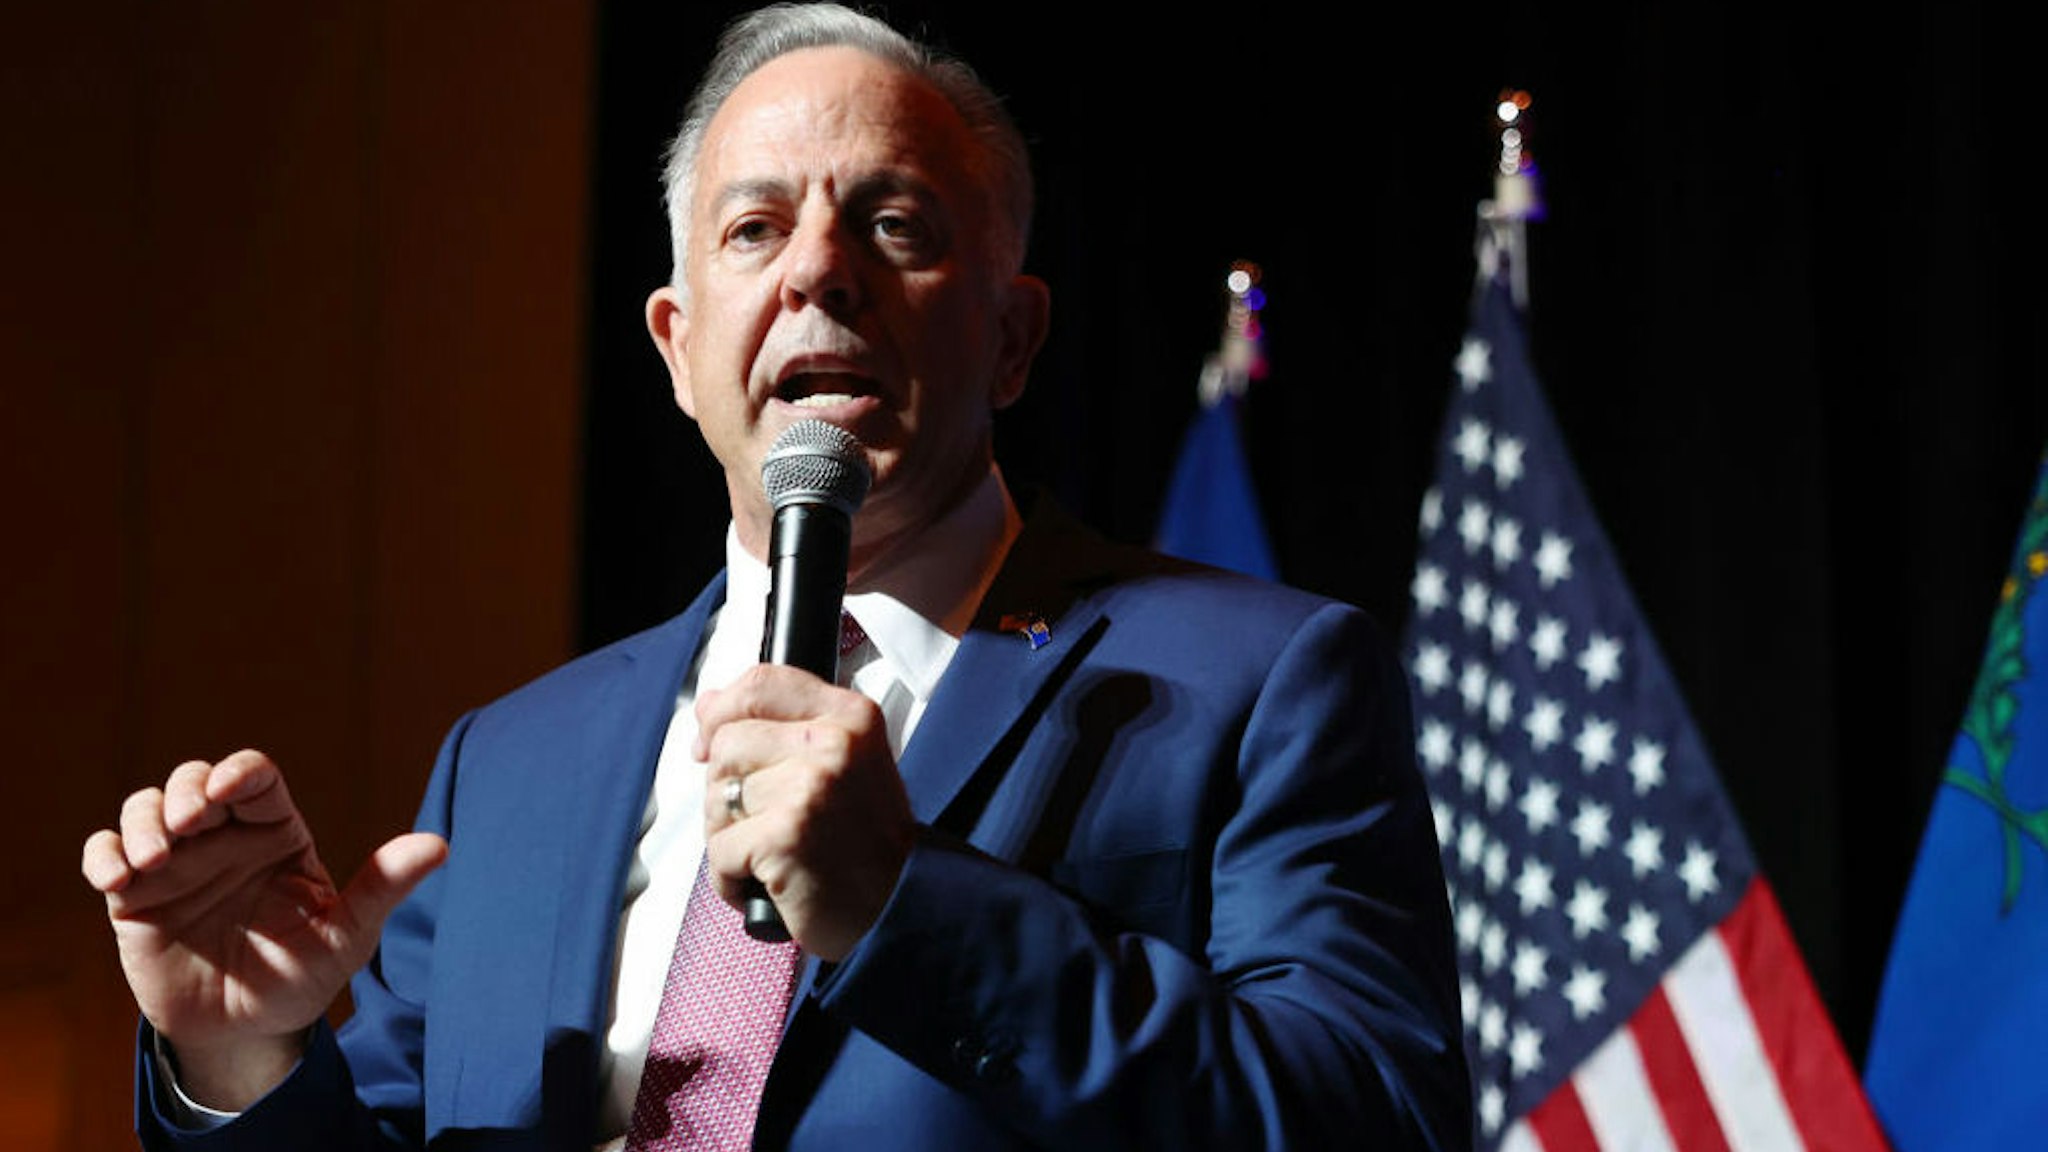 LAS VEGAS, NEVADA - NOVEMBER 08: Nevada Republican gubernatorial candidate Joe Lombardo speaks at a Republican midterm election night party at Red Rock Casino on November 08, 2022 in Las Vegas, Nevada. Clark County Sheriff Lombardo is in a close race with Nevada Gov. Steve Sisolak as ballots continue to be counted. (Photo by Mario Tama/Getty Images)